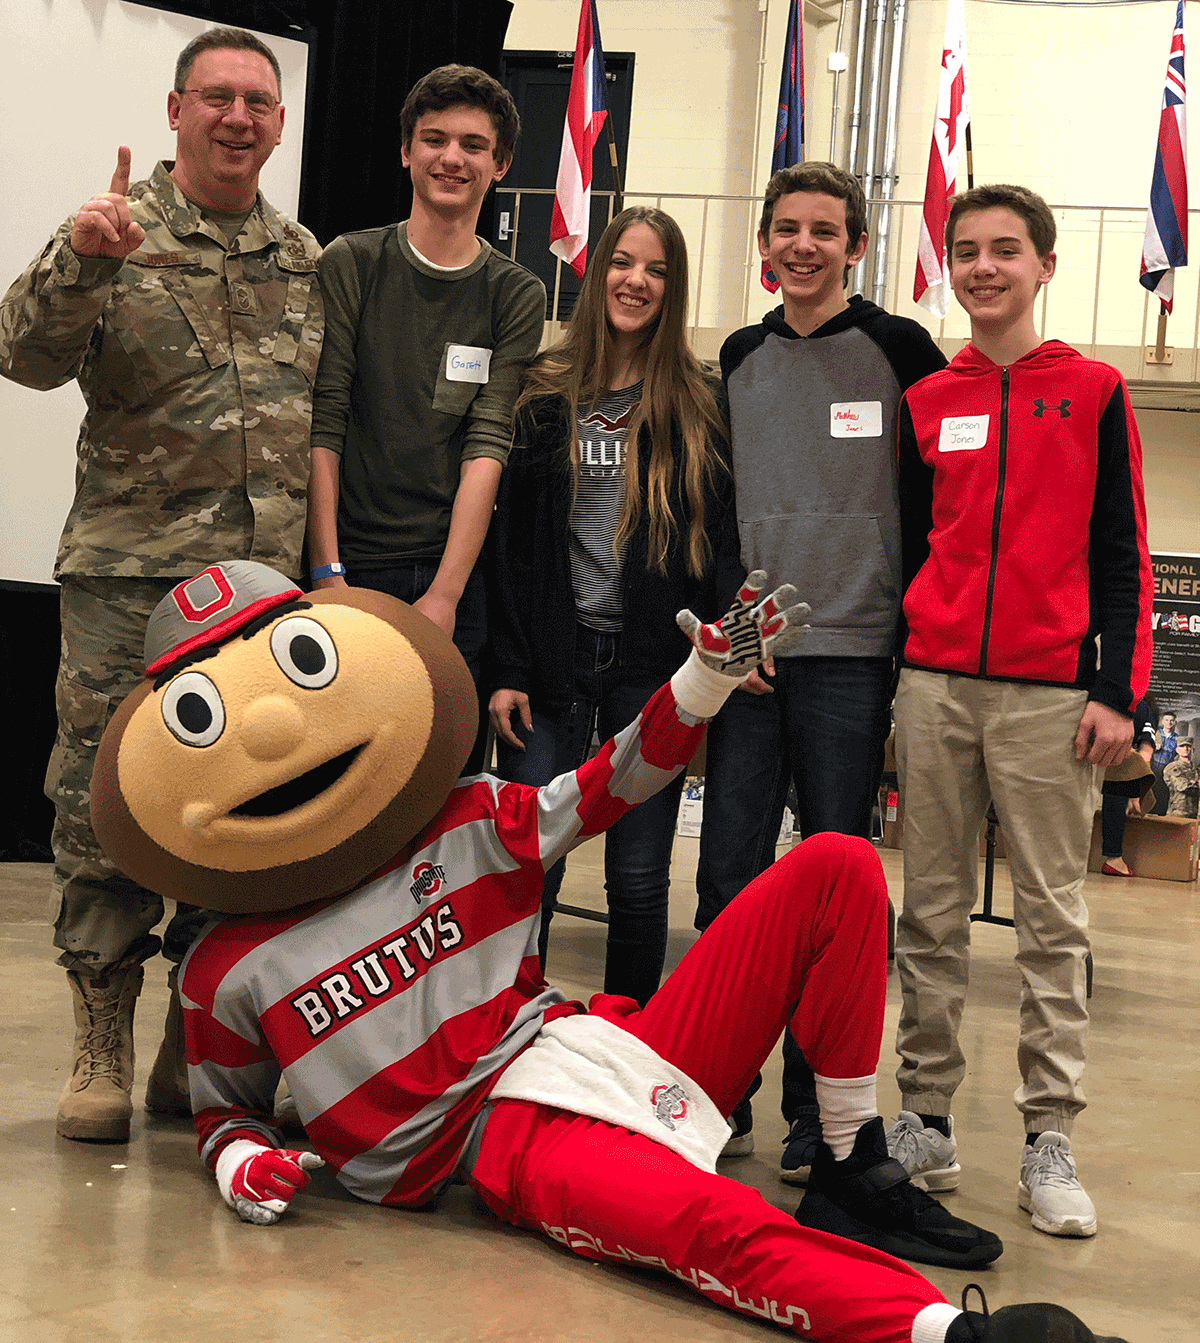 Chief Master Sgt. Thomas A. Jones stands with his children for a photo opt with Ohio State University mascot, Brutus Buckeye.